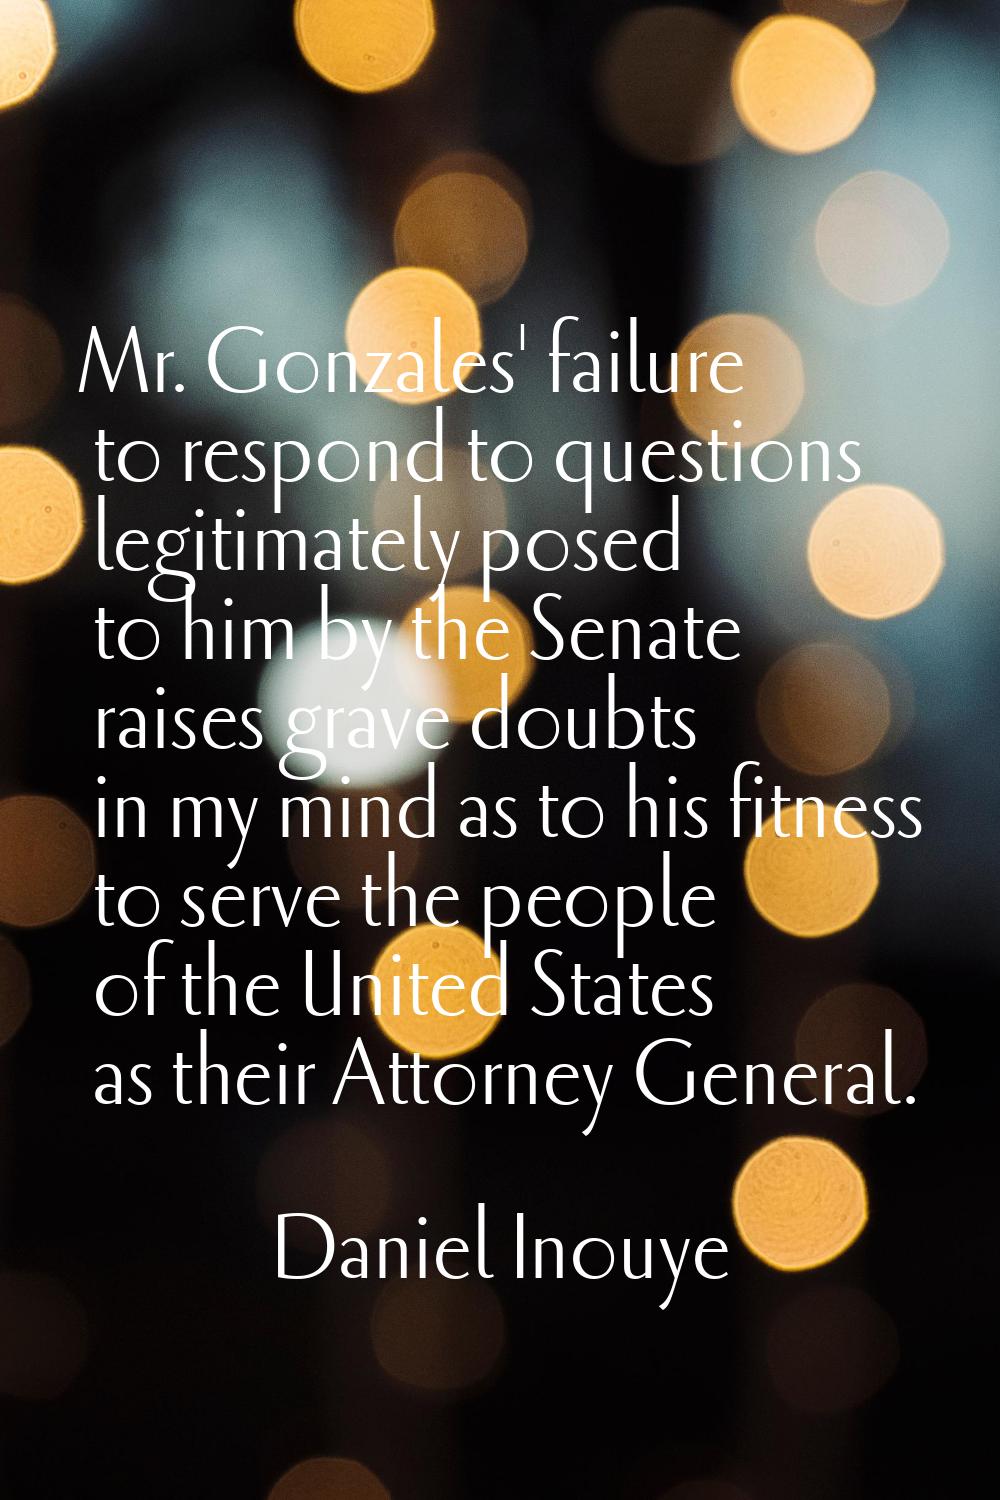 Mr. Gonzales' failure to respond to questions legitimately posed to him by the Senate raises grave 